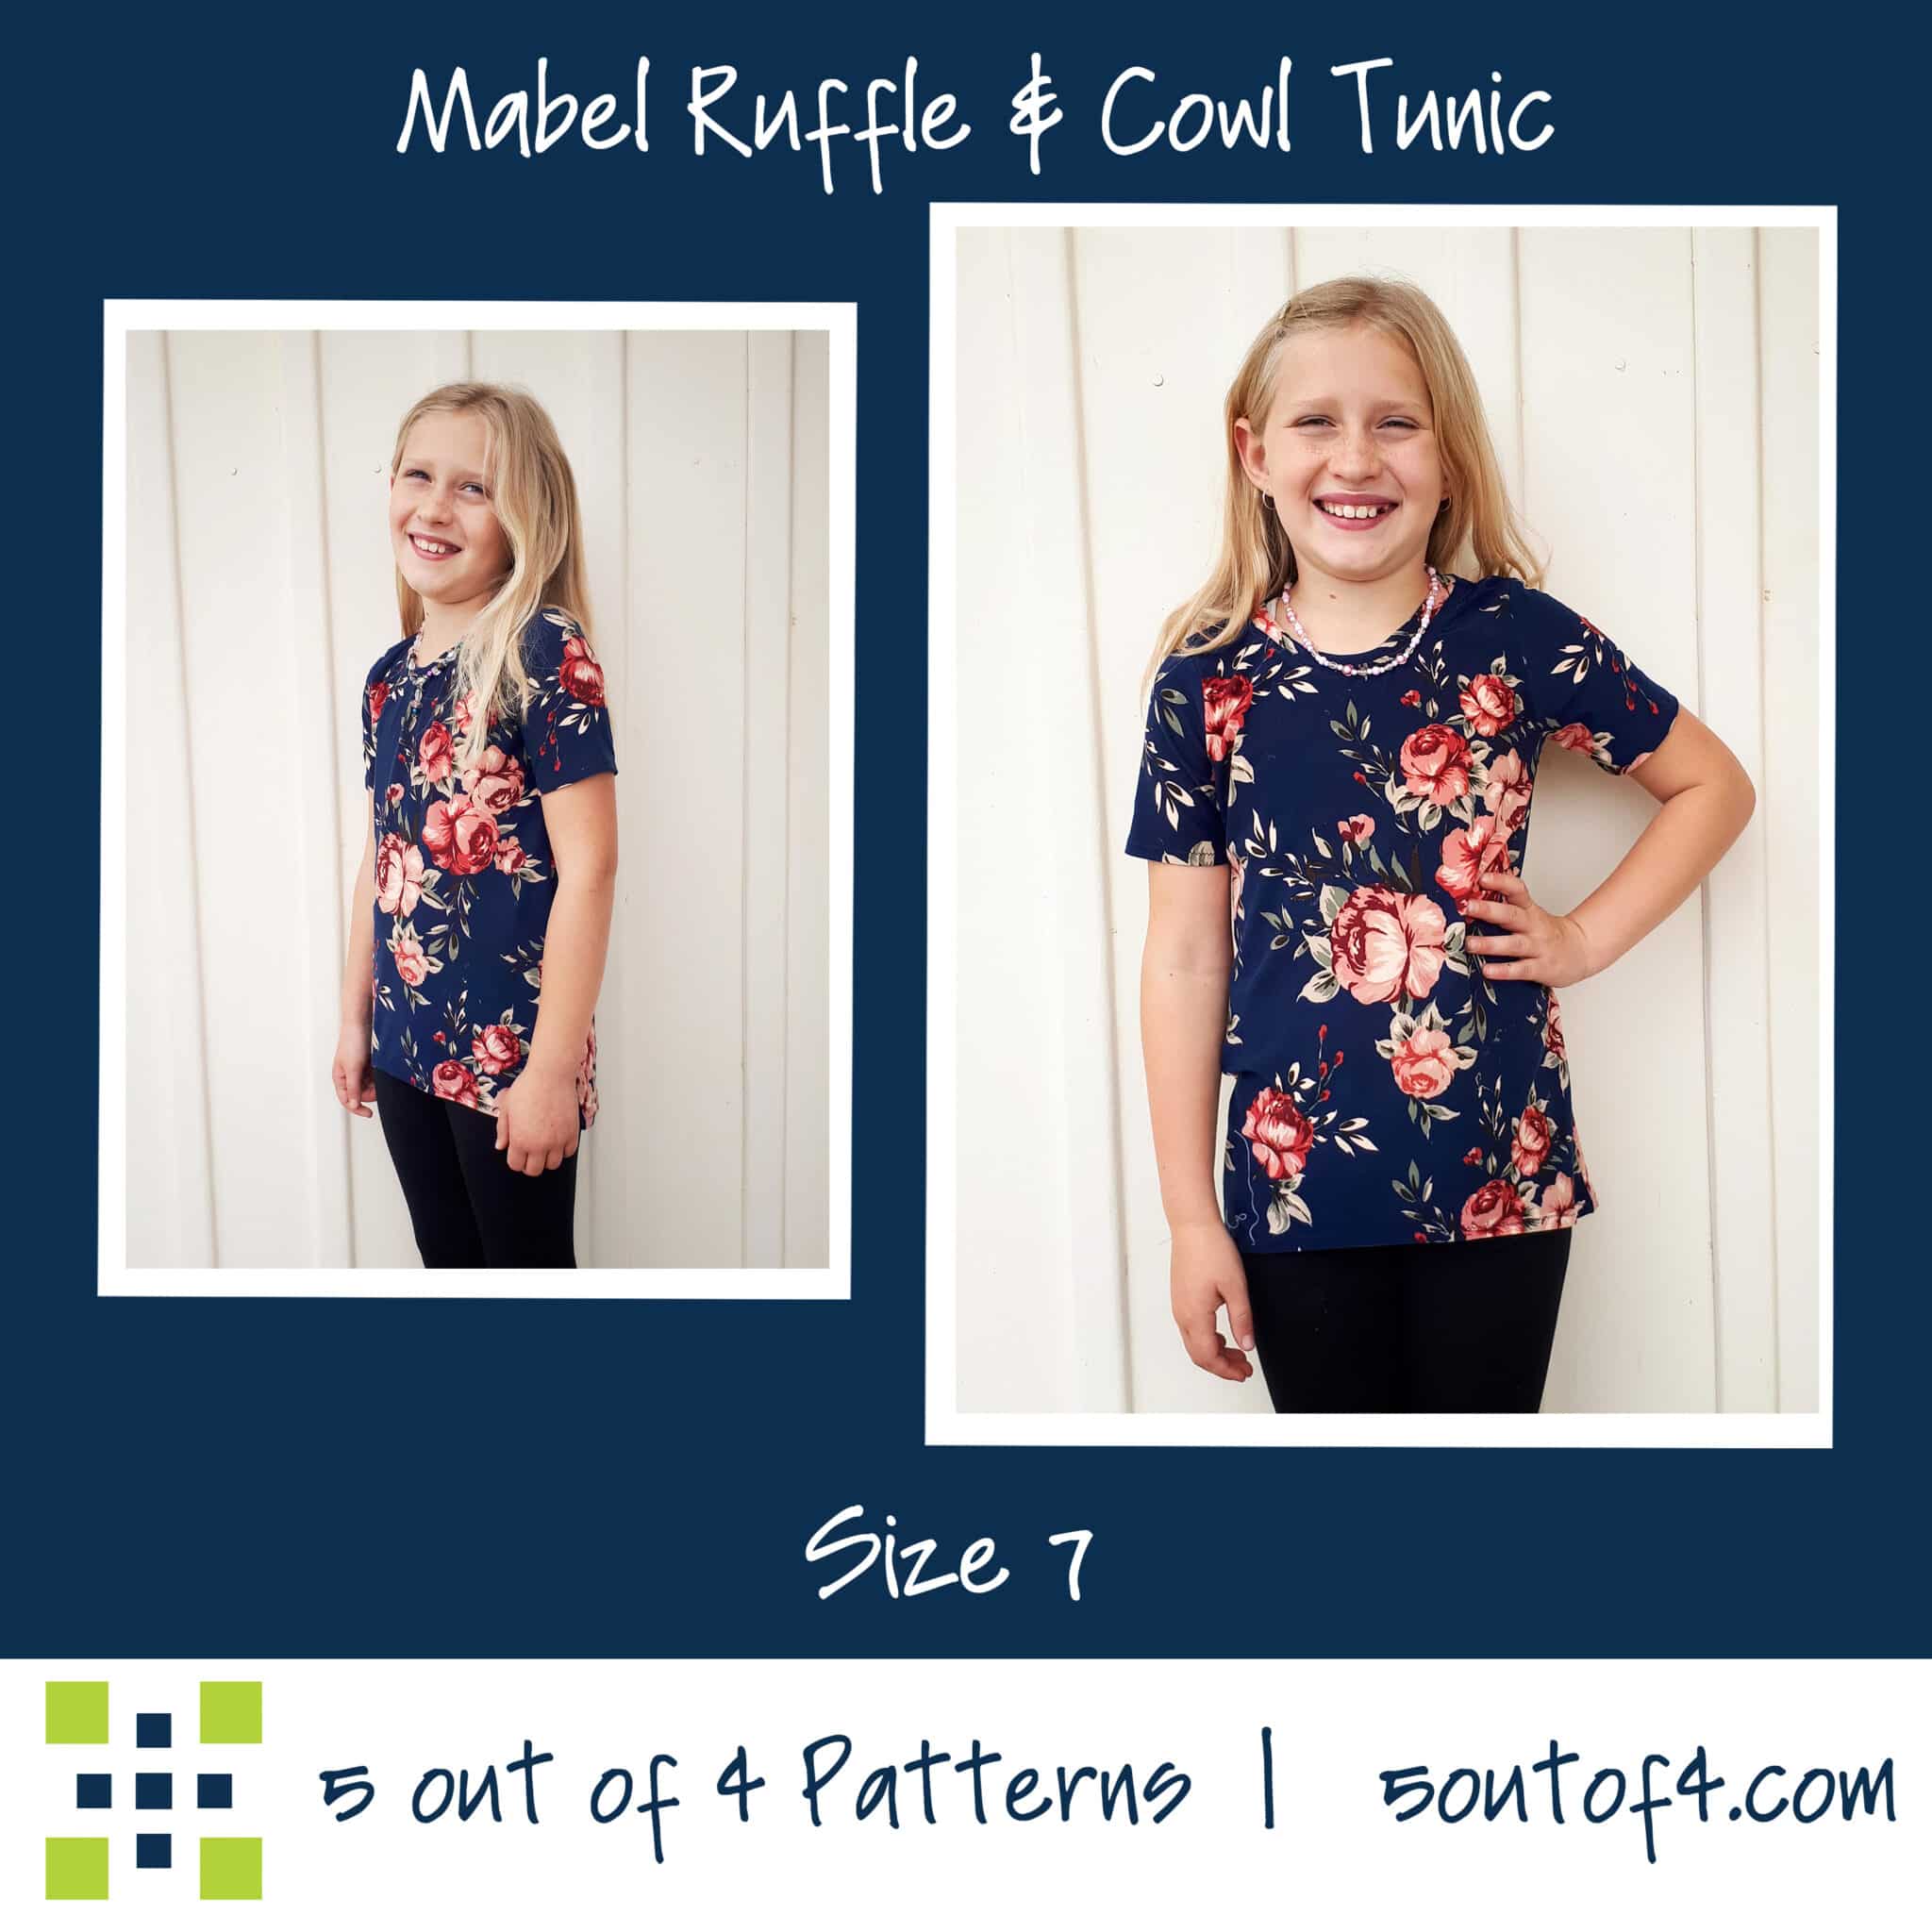 Kids' Mabel Ruffle and Cowl Tunic - 5 out of 4 Patterns